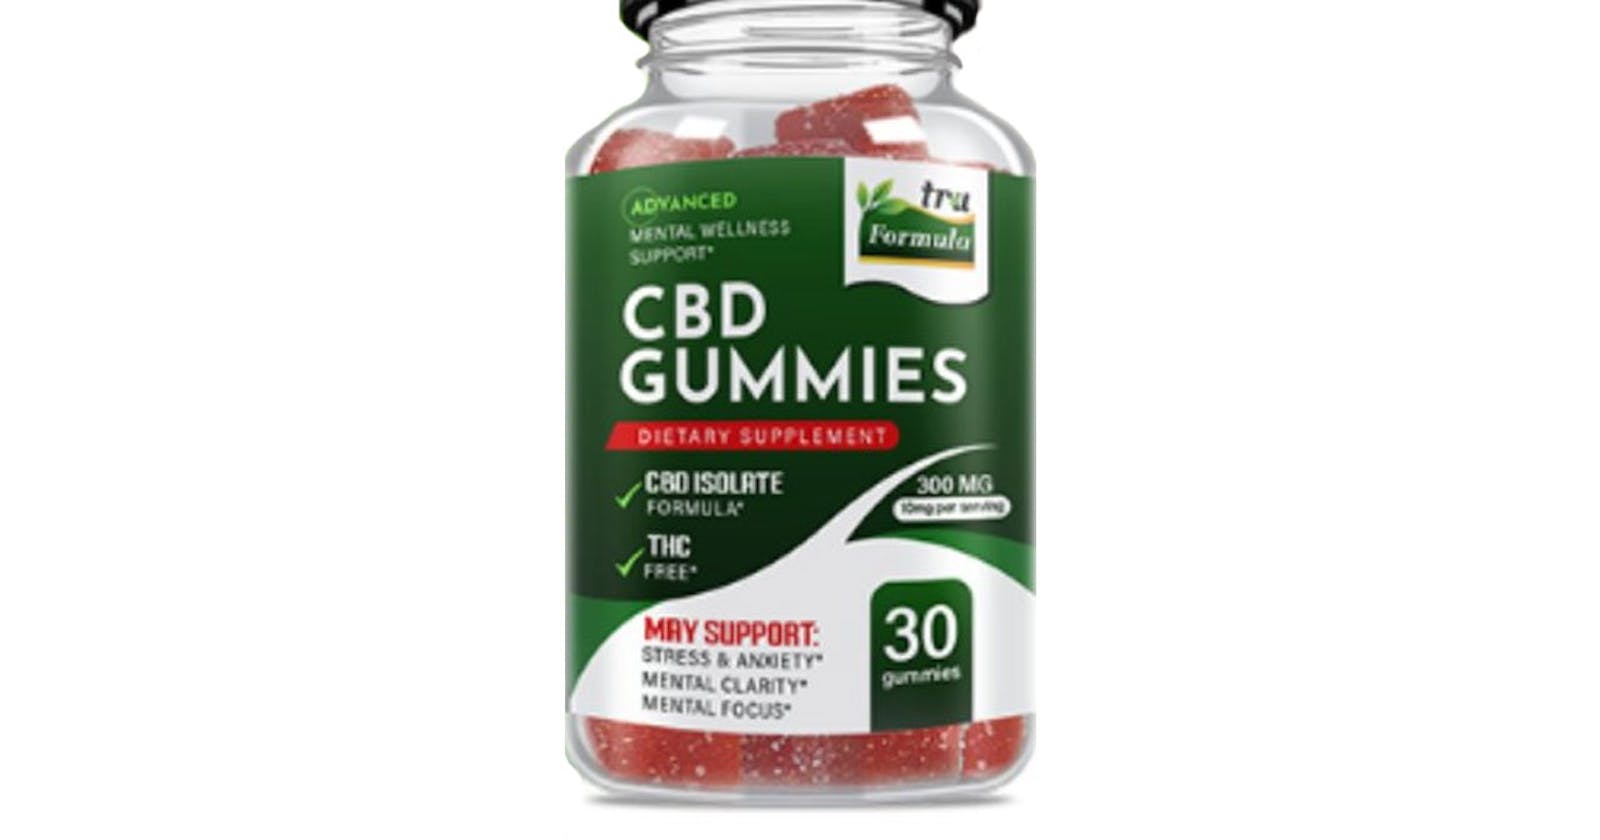 Tru Formula CBD Gummies – [TOP REVIEWS] “PROS OR CONS” HYPE & HEALTH BALANCE (TRUSTED OR FRAUD) PRICE & REAL CUSTOMER REVIEWS